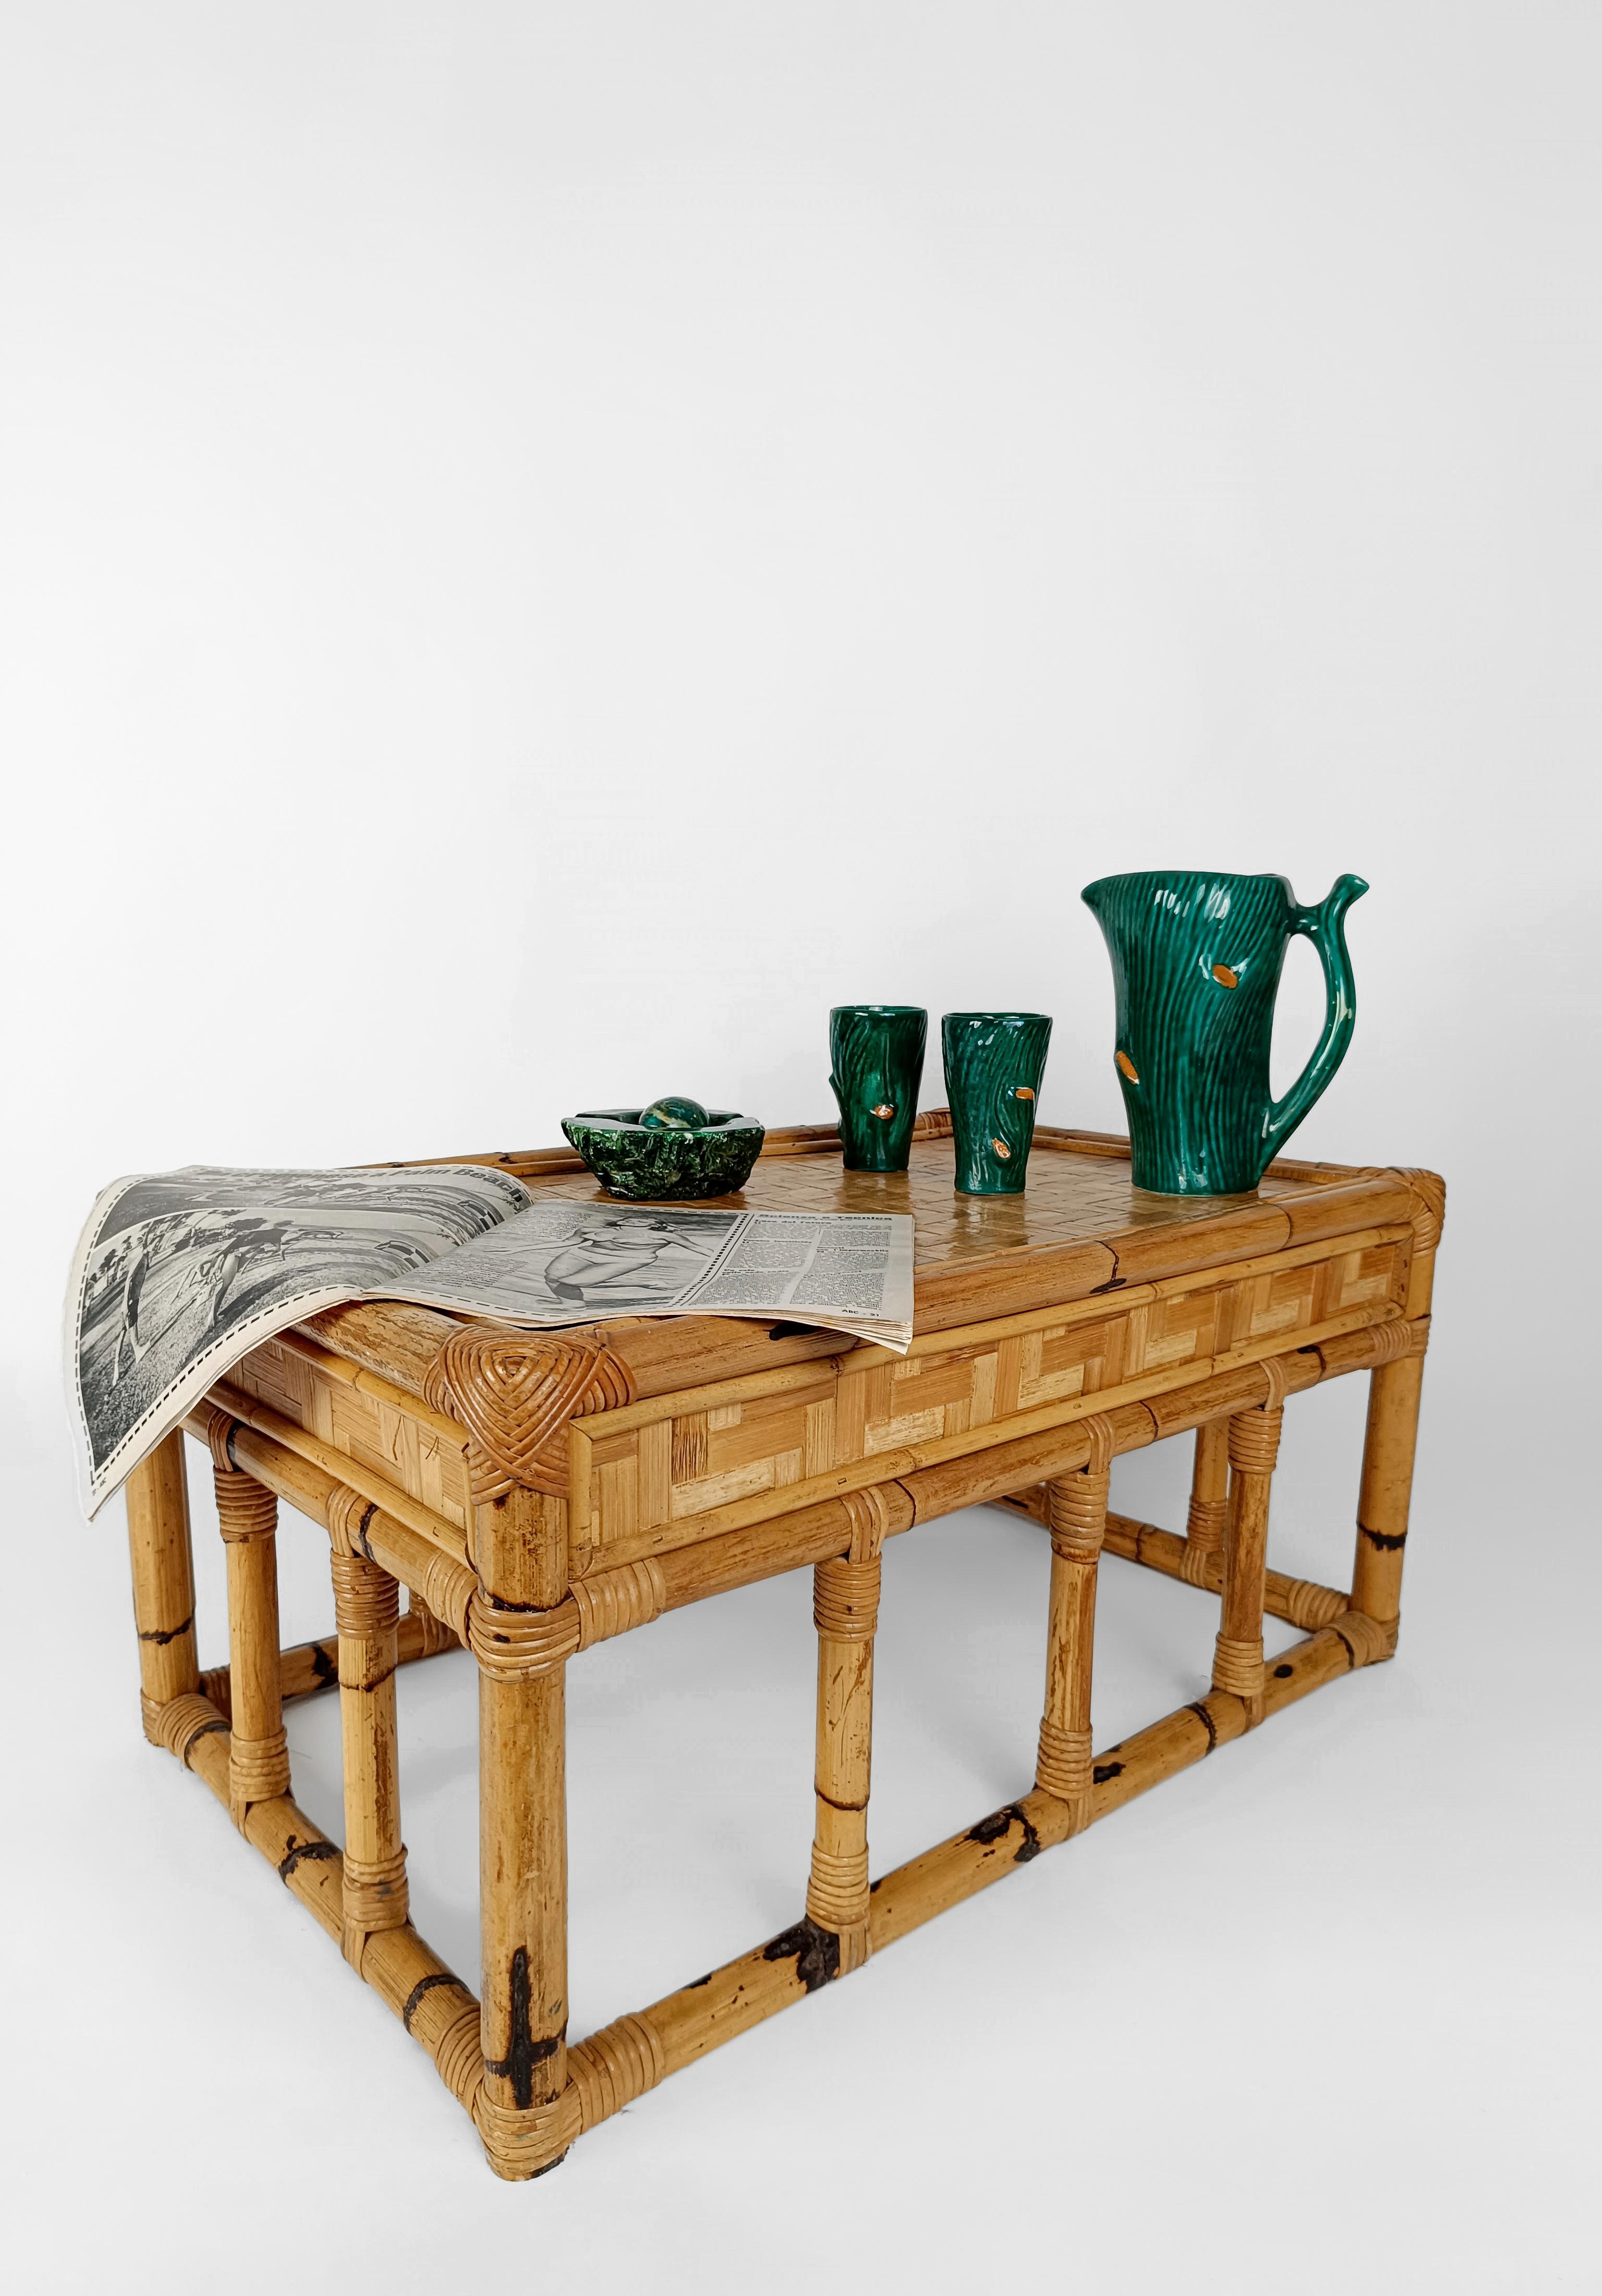 A solid and massive vintage coffee table dating back to the late 60s and 70s.
Made in Italy but inspired by the Chinese Chippendale style, this Mid Century Modern Coffe Table has a rectangular top covered with a dense rattan parquet framed by thick